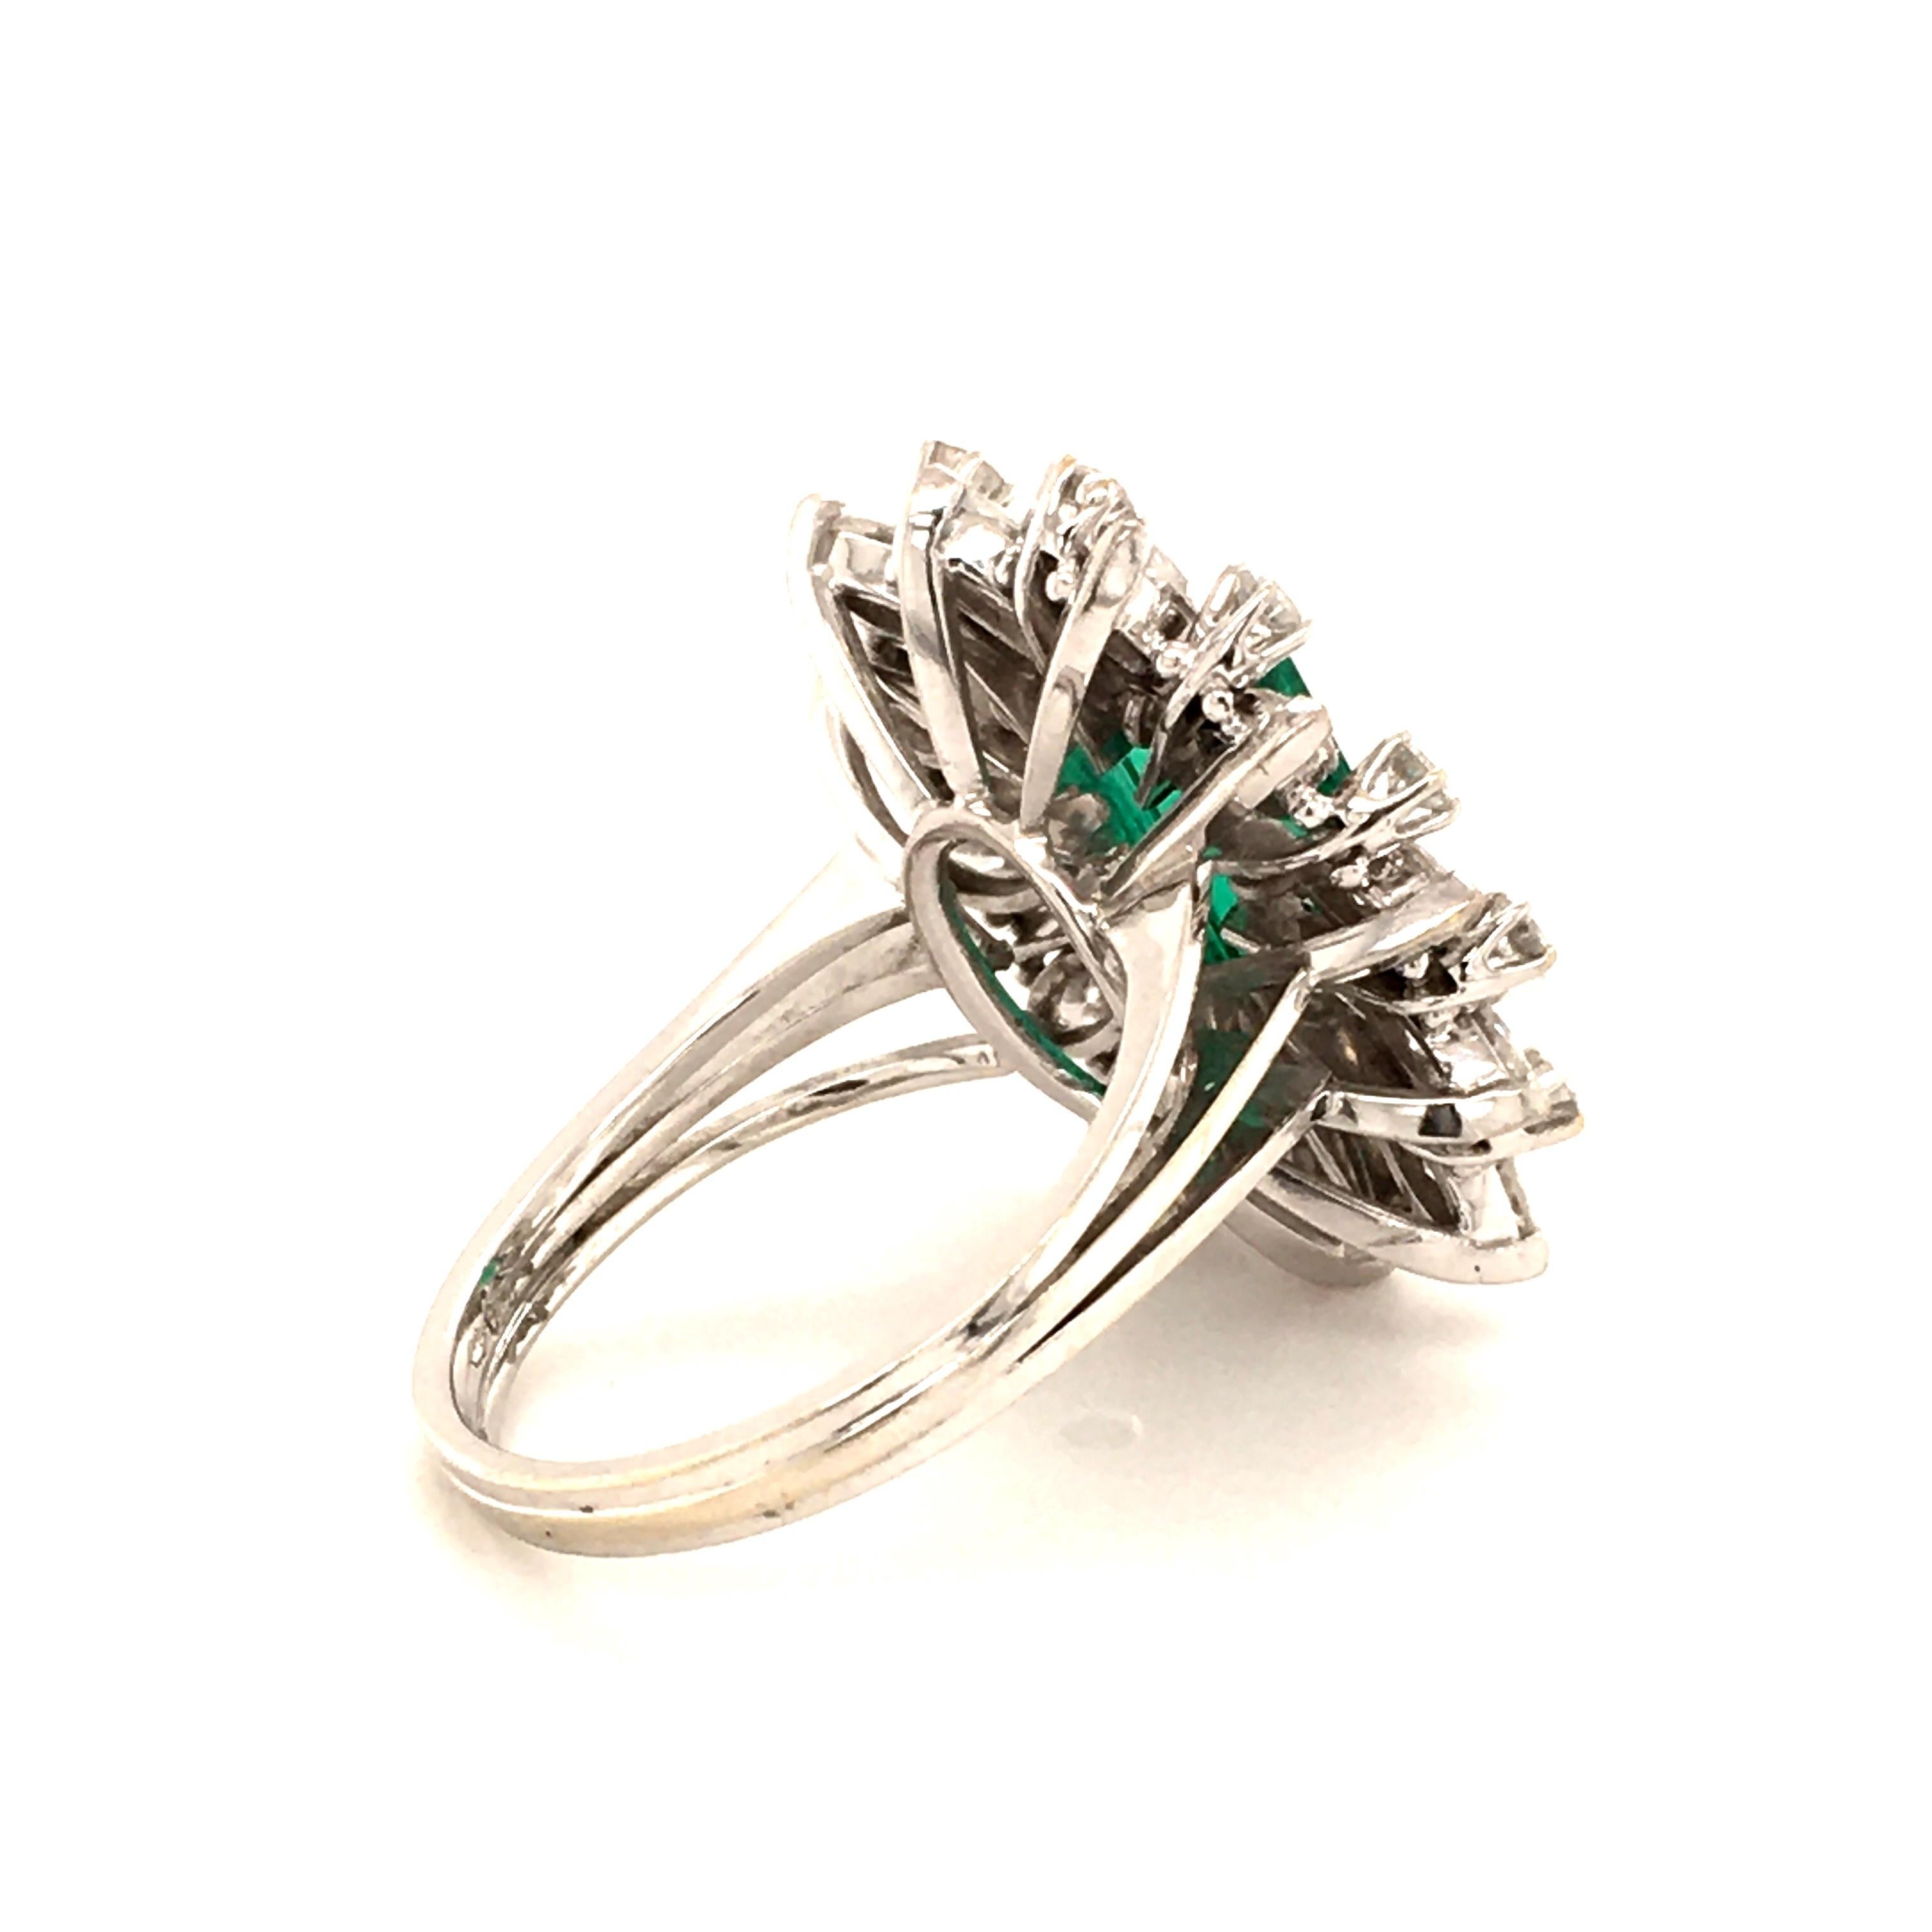 2.25 Carat Colombian Emerald and Diamond Ring in 18 Karat White Gold 4